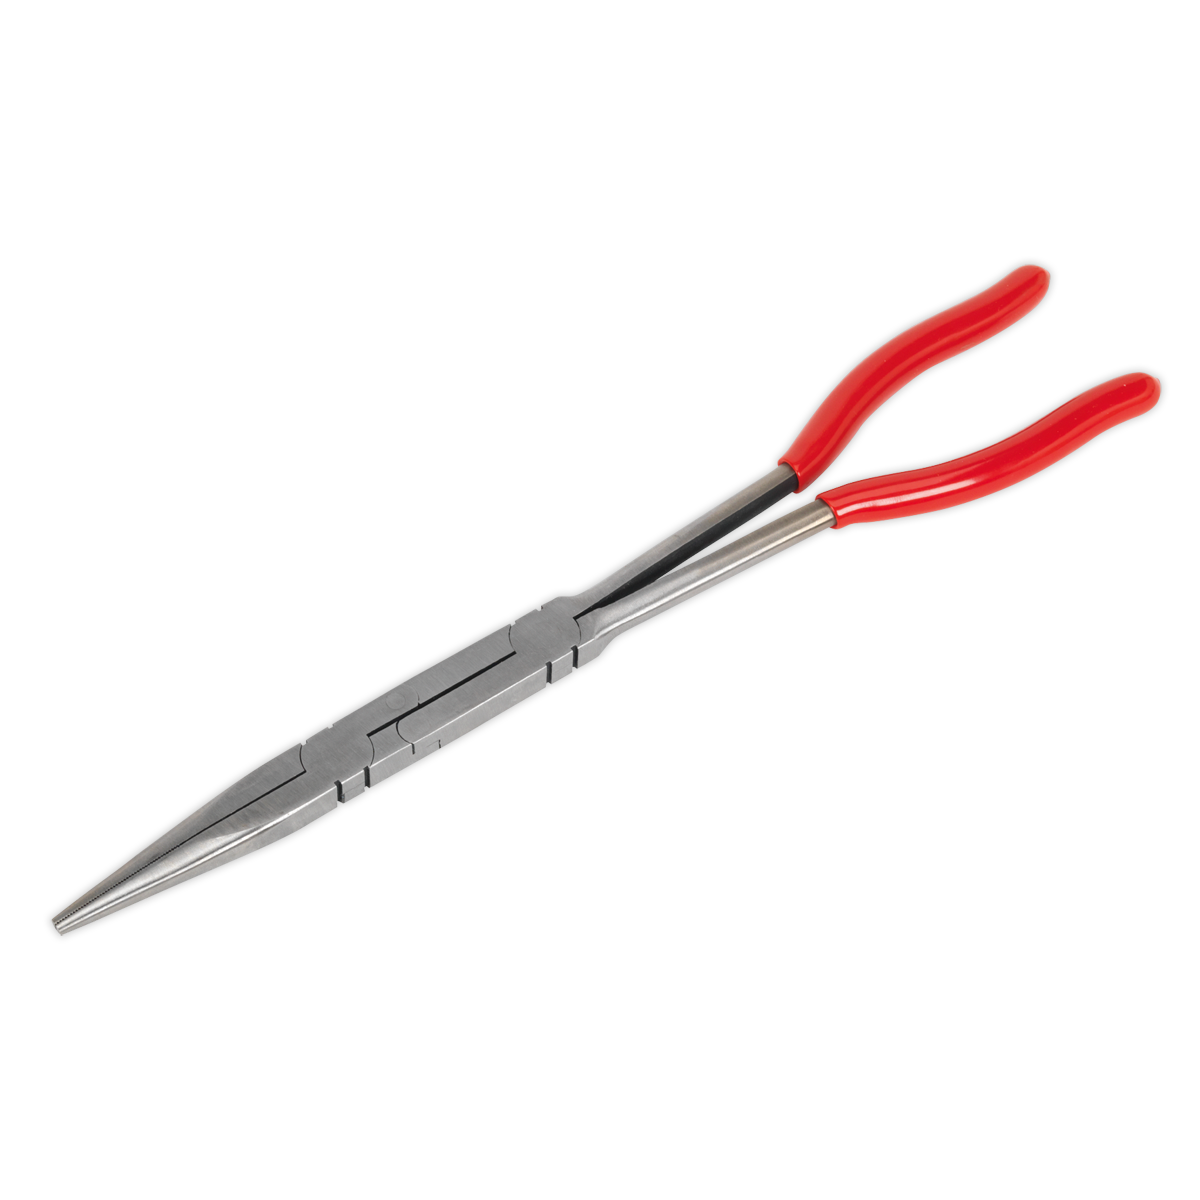 Sealey 335mm Double Joint Needle Nose Pliers AK8591